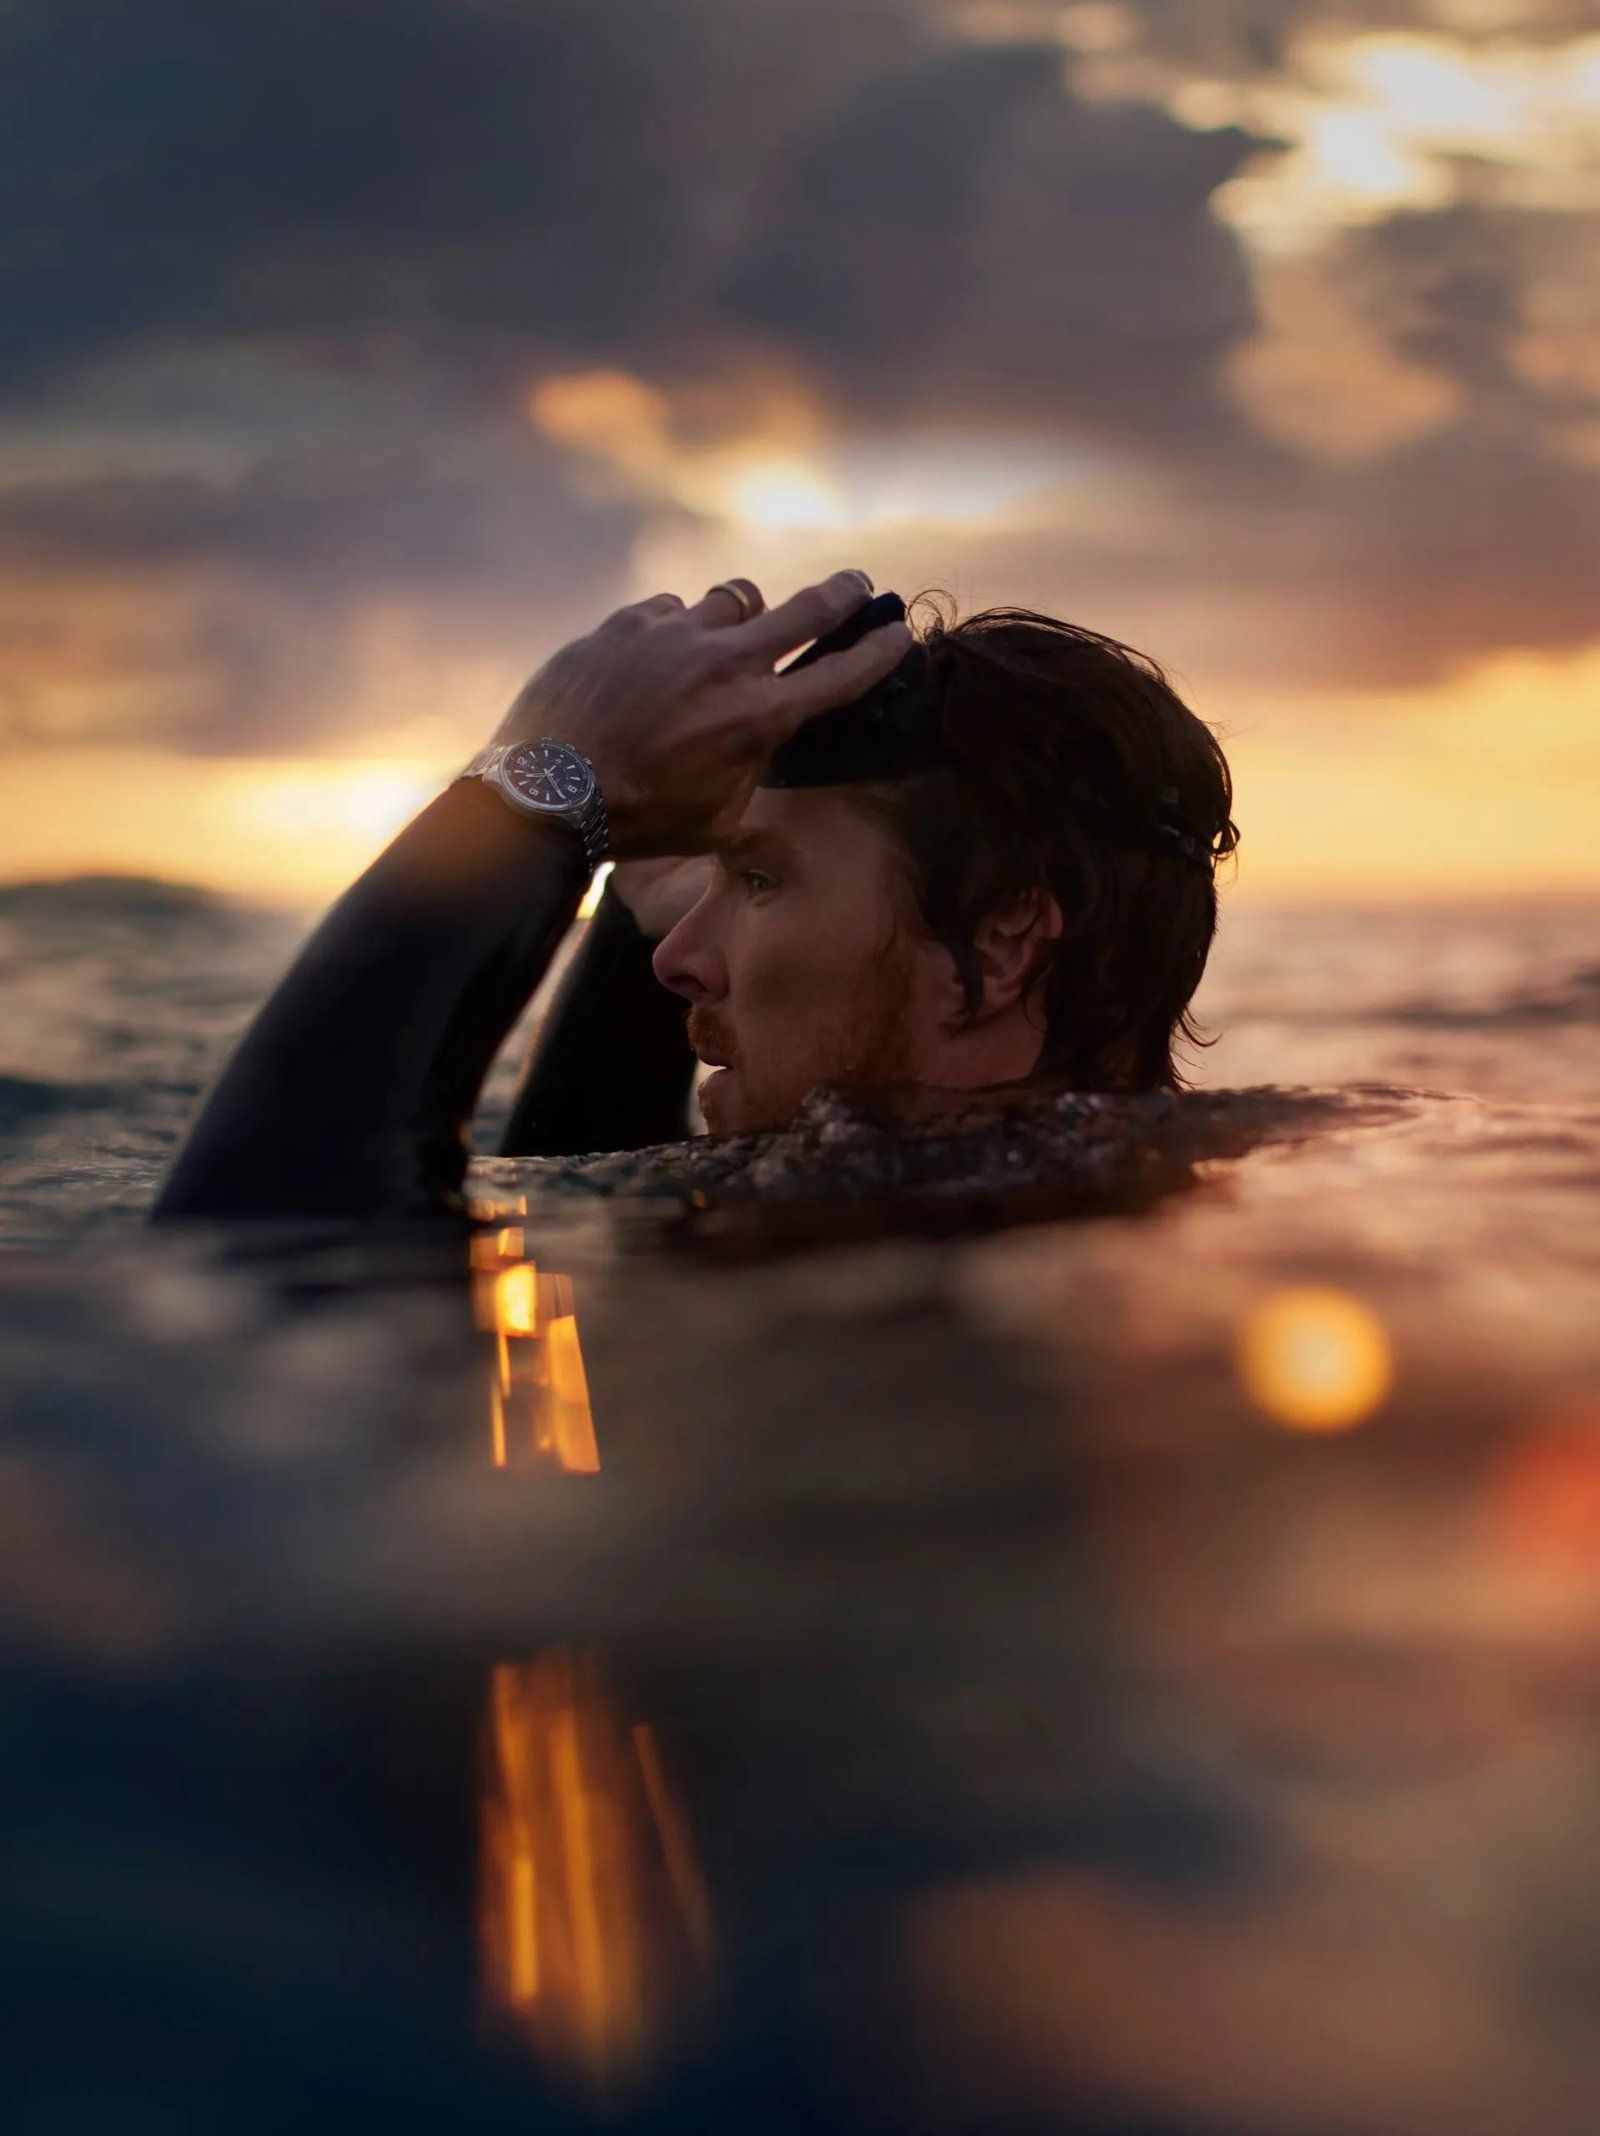 Benedict Cumberbatch wore the Jaeger-LeCoultre Polaris Mariner Memovox for the making of the short film "In a Breath." (Image credits: Watch I Love)